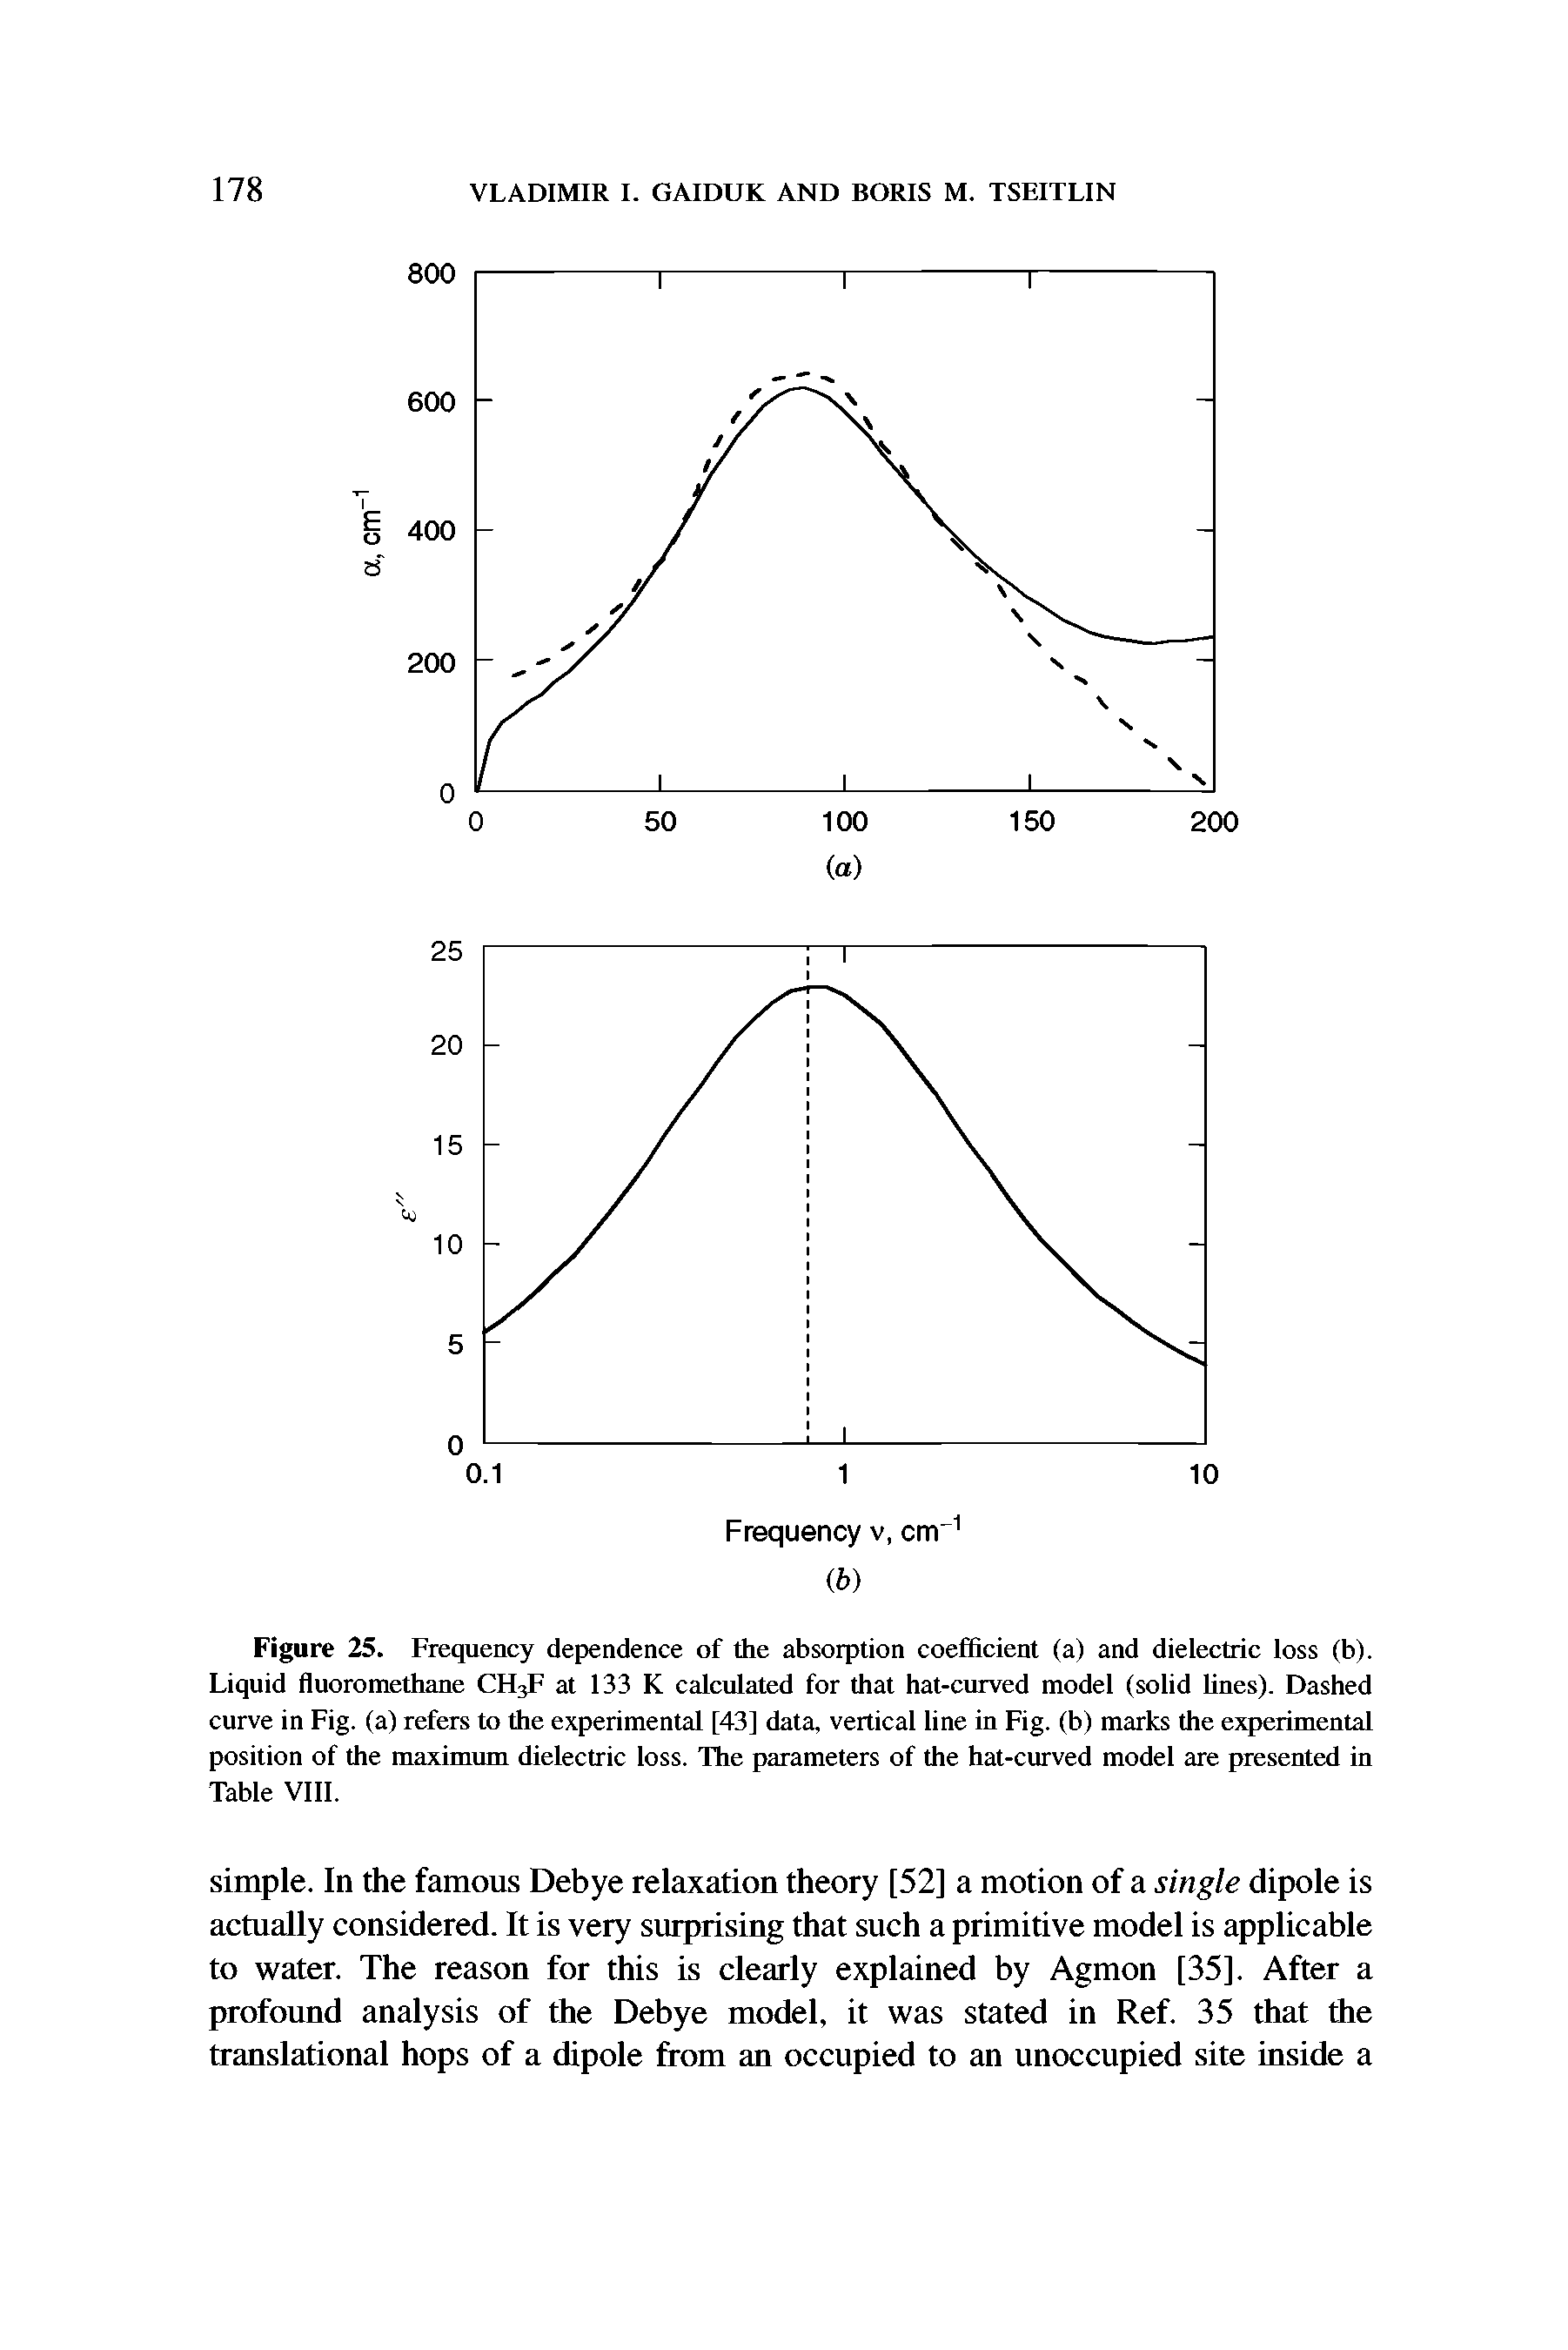 Figure 25. Frequency dependence of the absorption coefficient (a) and dielectric loss (b). Liquid fluoromethane CH F at 133 K calculated for that hat-curved model (solid lines). Dashed curve in Fig. (a) refers to the experimental [43] data, vertical line in Fig. (b) marks the experimental position of the maximum dielectric loss. The parameters of the hat-curved model are presented in Table VIII.